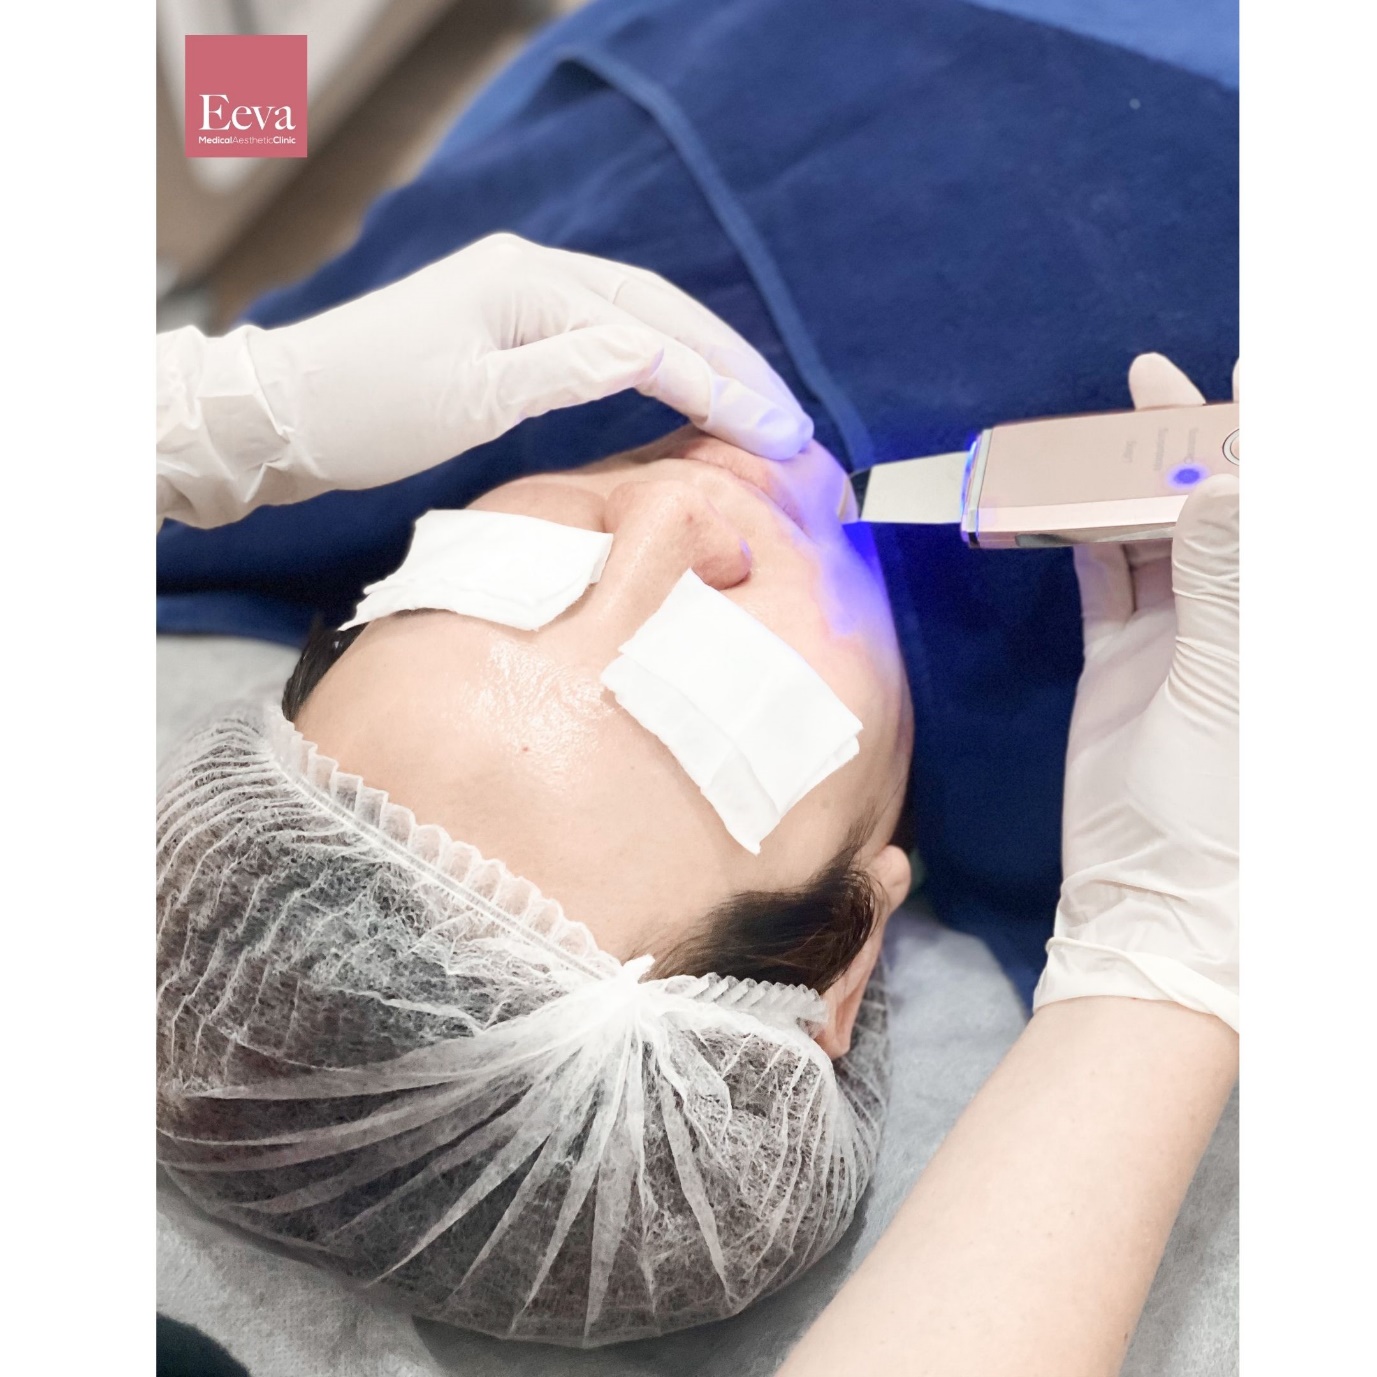 Bridal Blossom from inside out | Eeva Medical Aesthetic Clinic